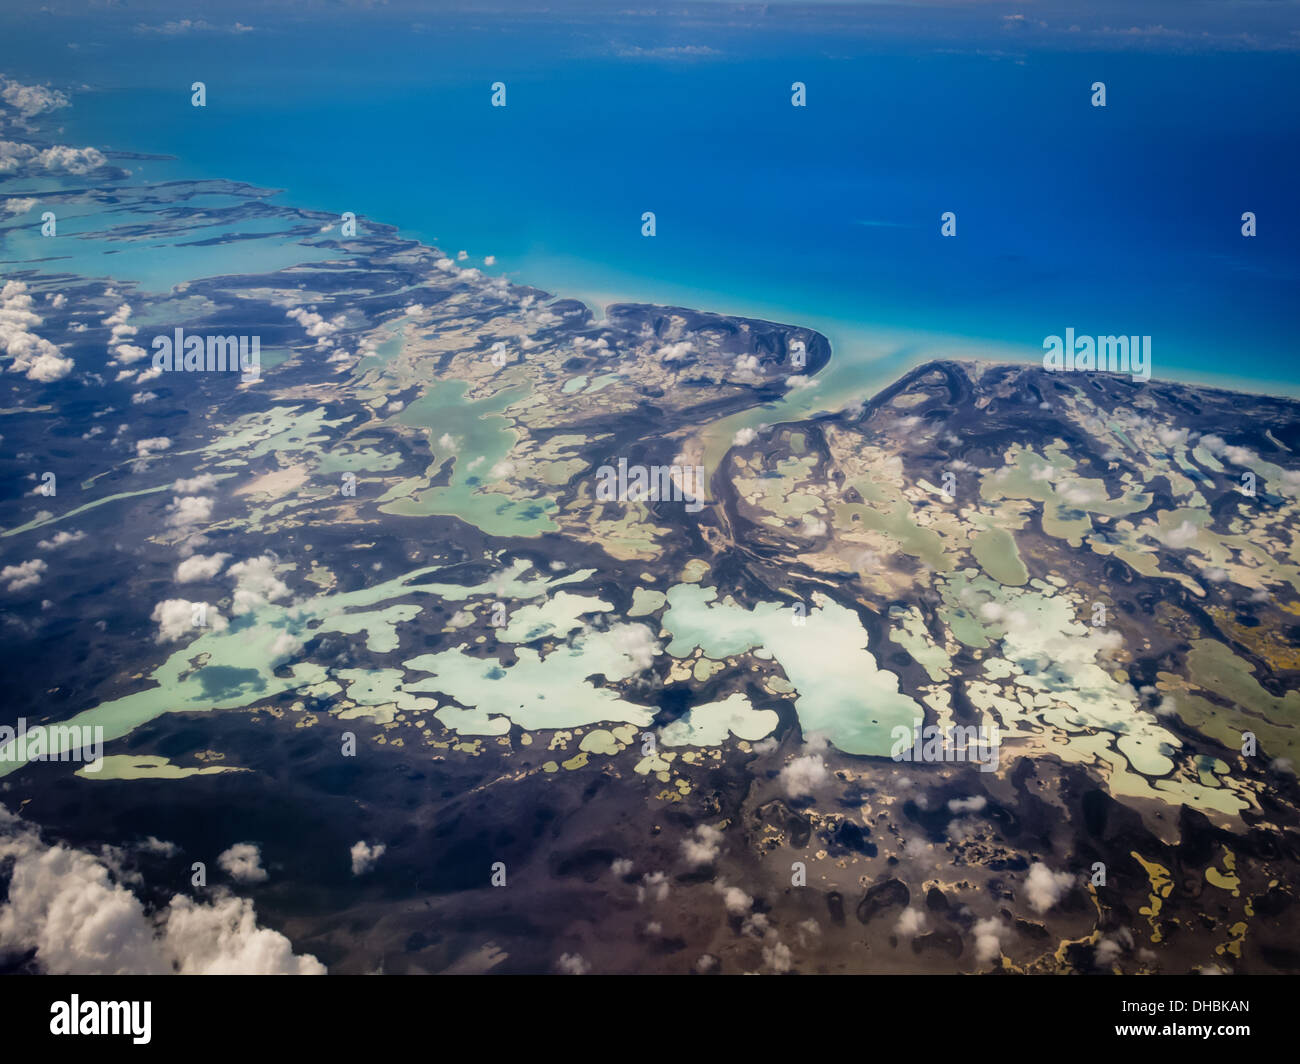 Aerial view of Bahamas lagoons and coast in marbleized pattern Stock Photo